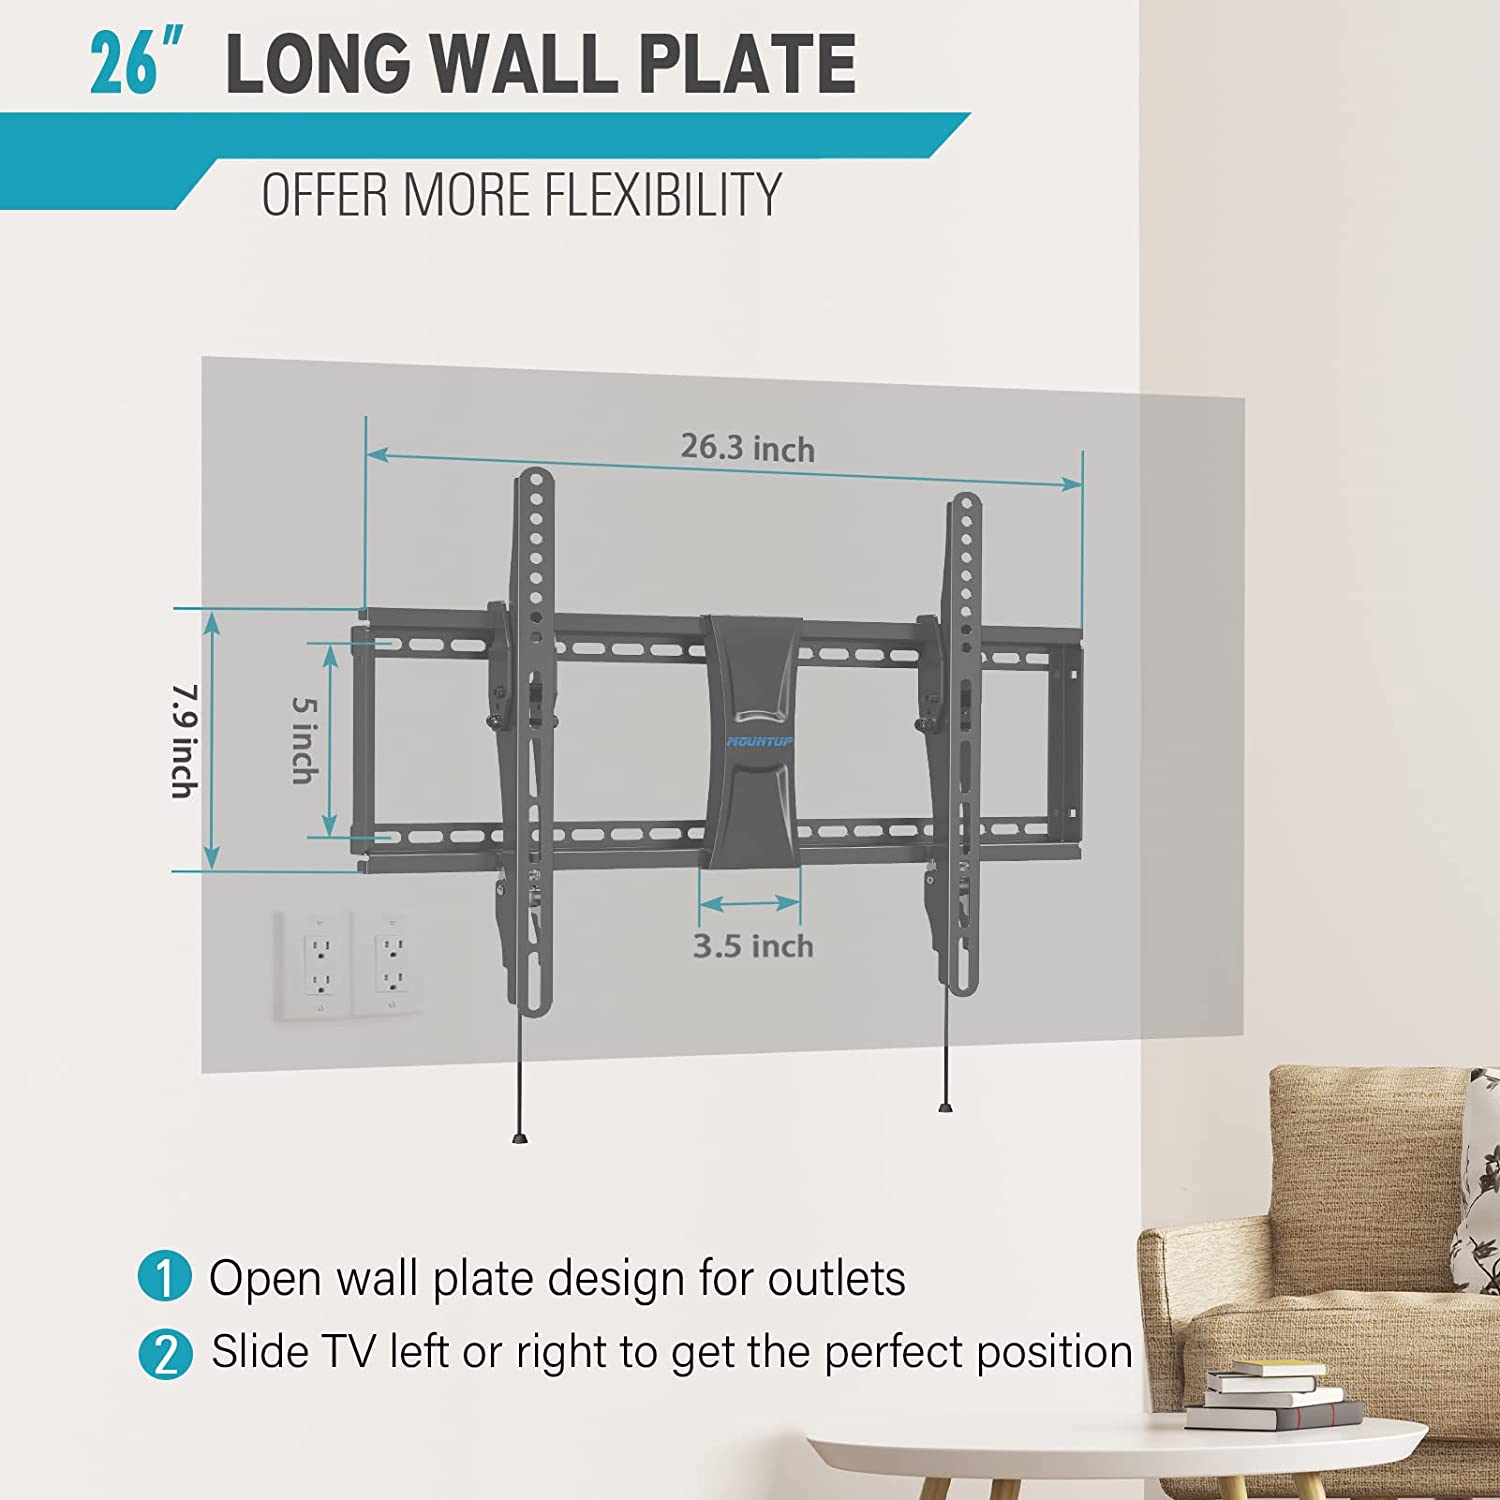 26'' open wall plate works on 24'' wood stud